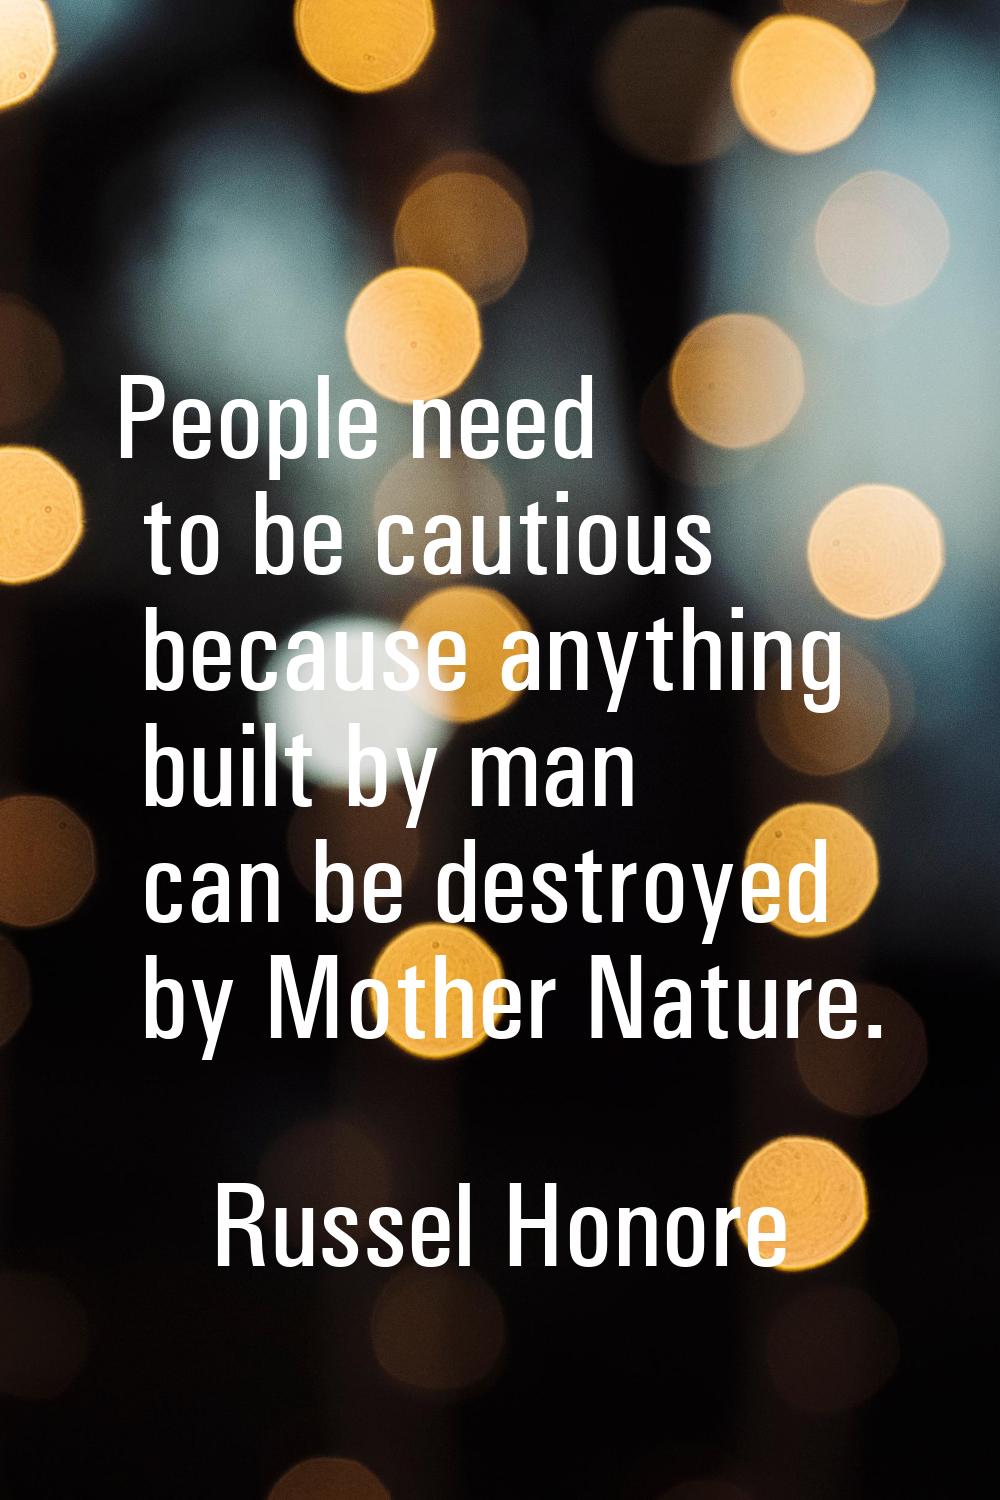 People need to be cautious because anything built by man can be destroyed by Mother Nature.